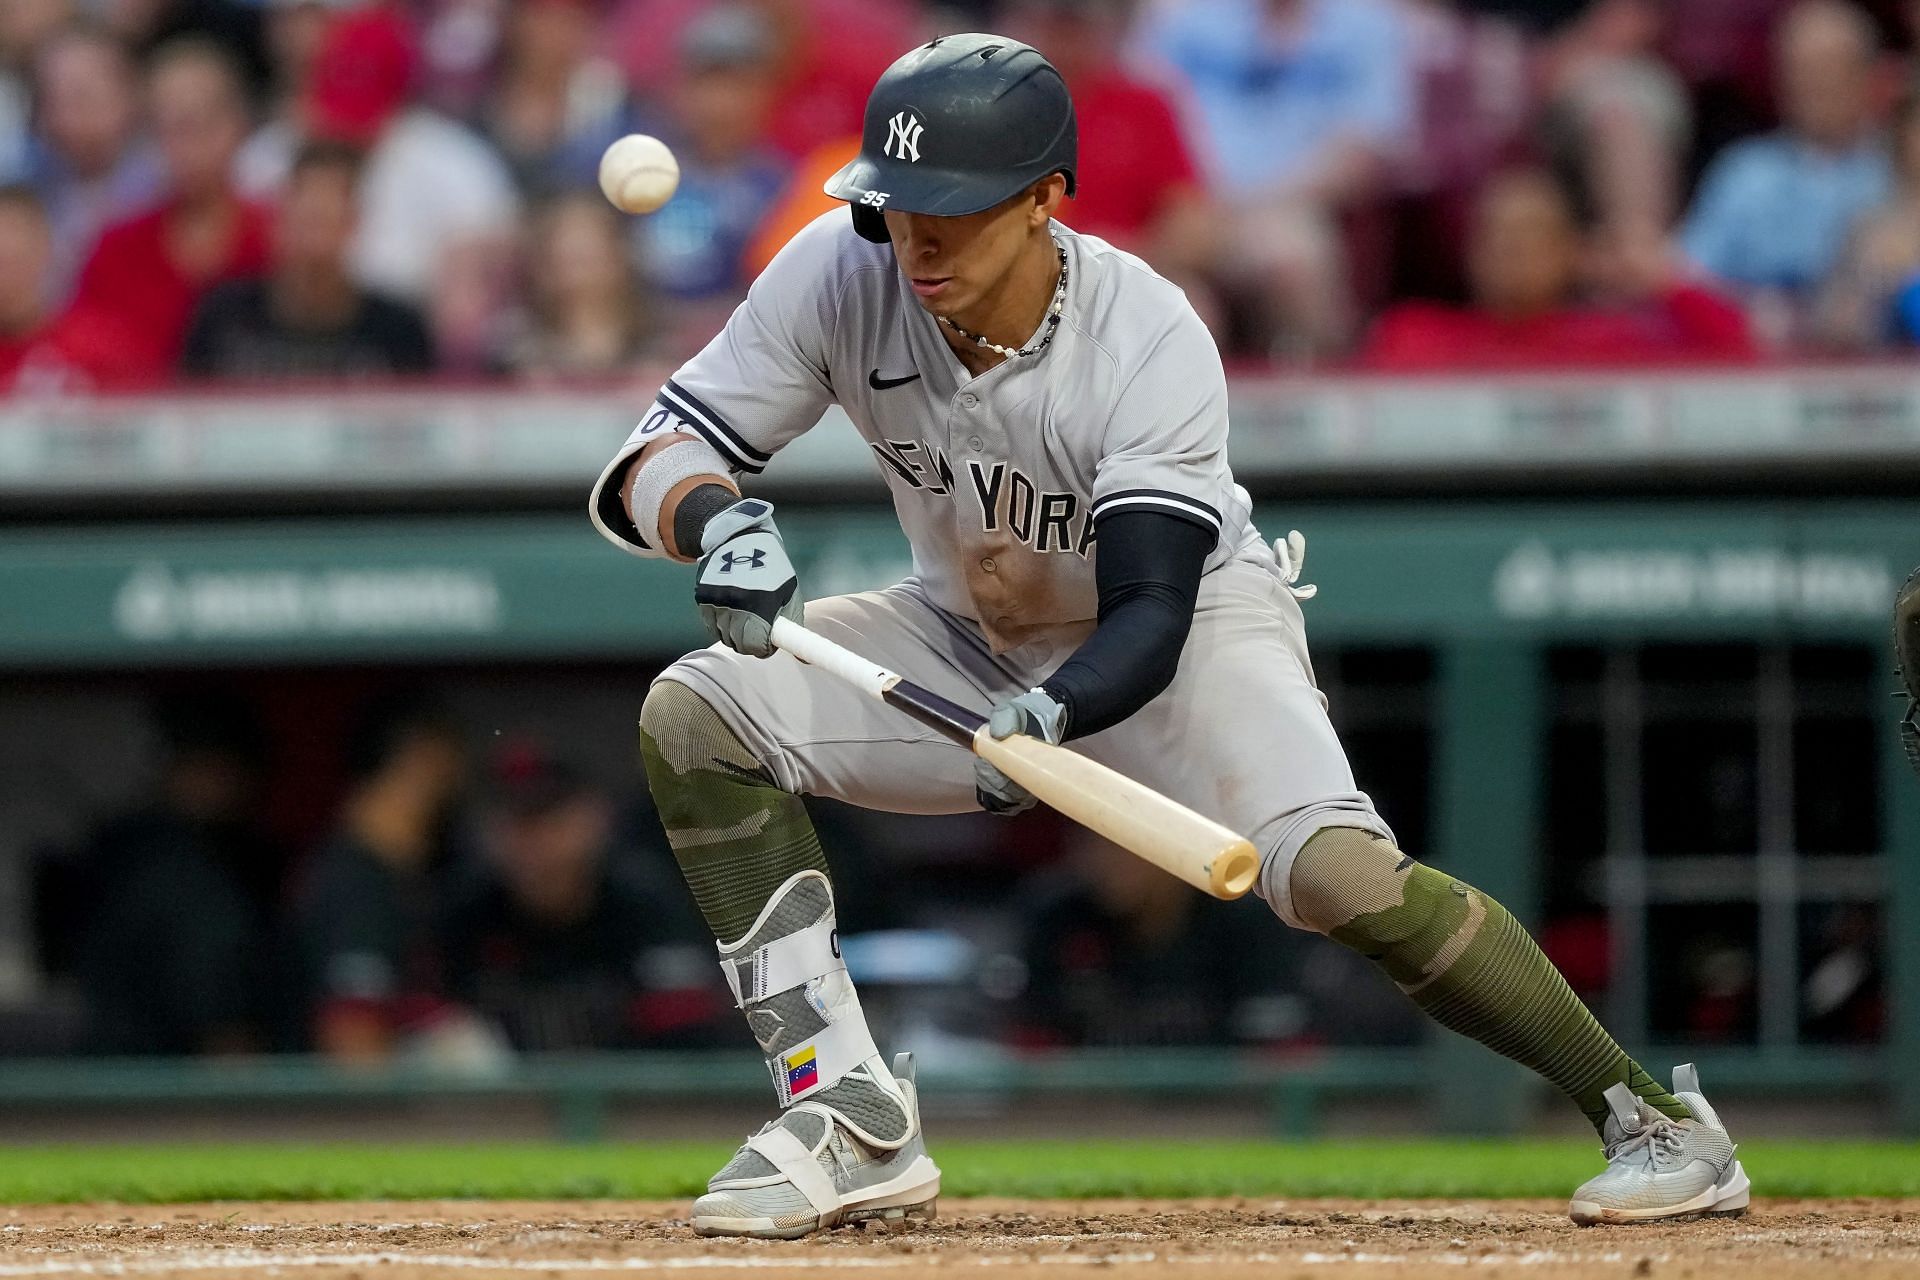 Oswaldo Cabrera of the New York Yankees bunts for a single in the seventh inning against the Cincinnati Reds